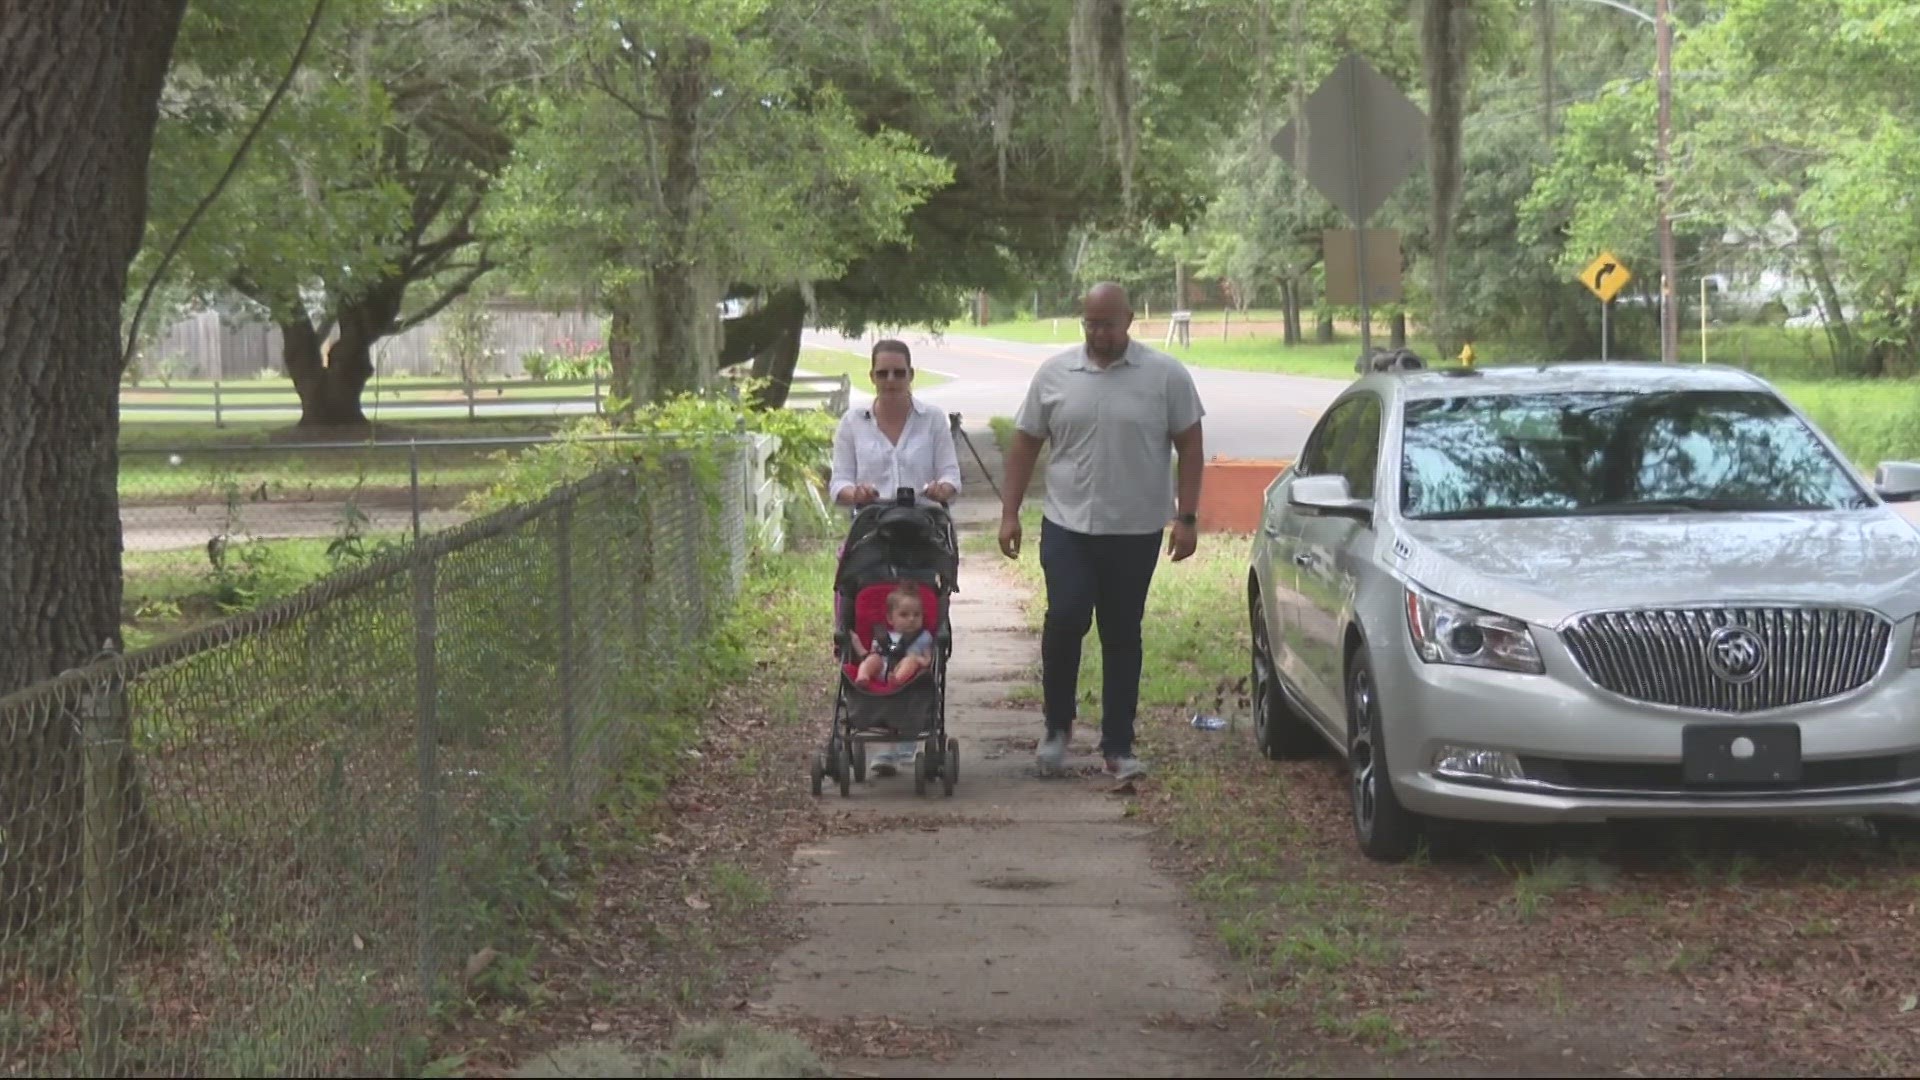 Last year, Amanda Sheehan started taking daily walks with her baby girl down Live Oak Drive, but she felt her walks were more stressful than relaxing.